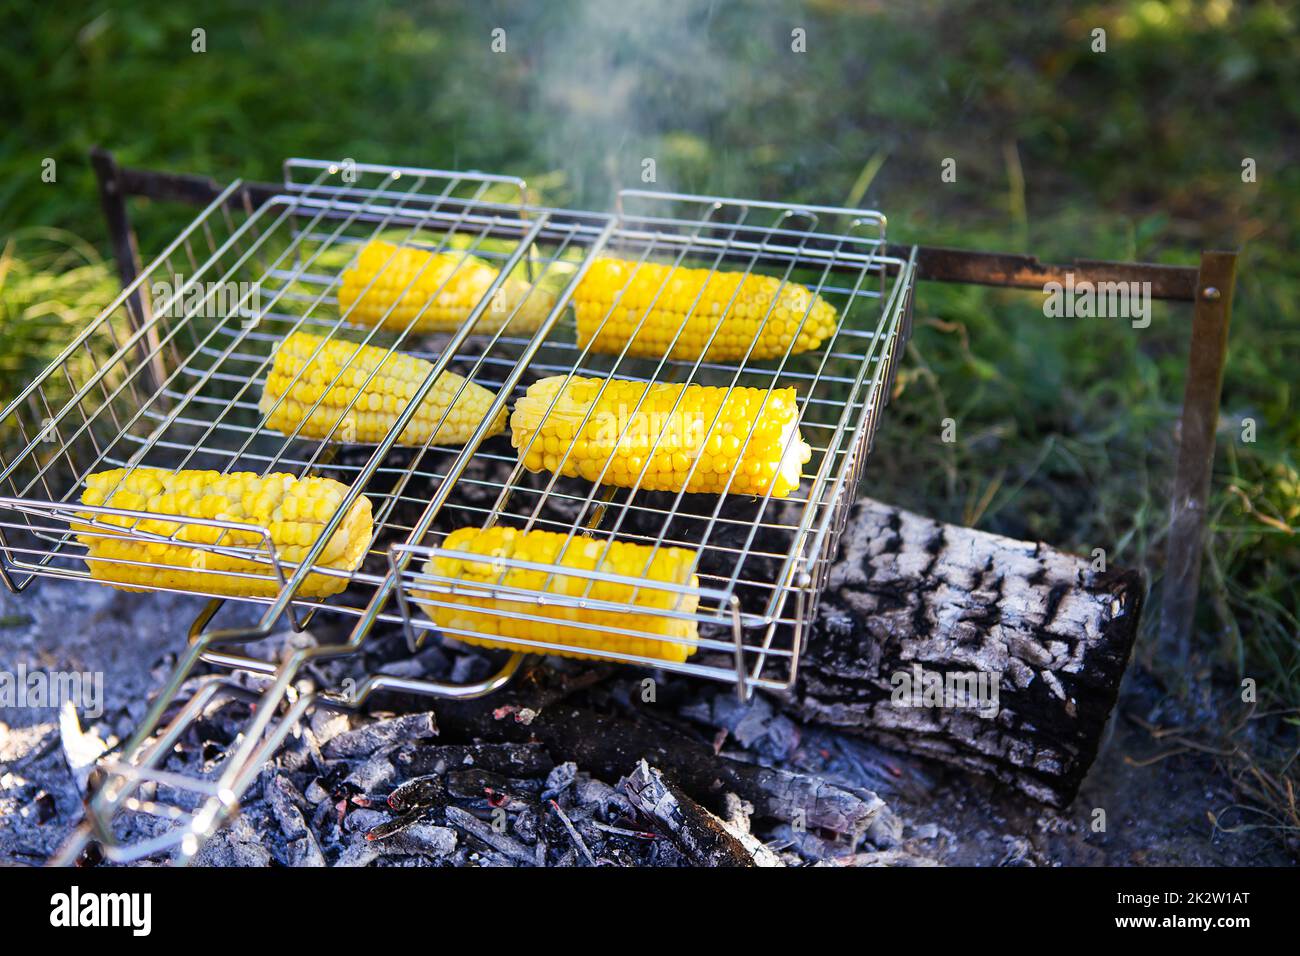 Roasted corn cobs of yellow succulent corn grilled on a wire rack. Stock Photo